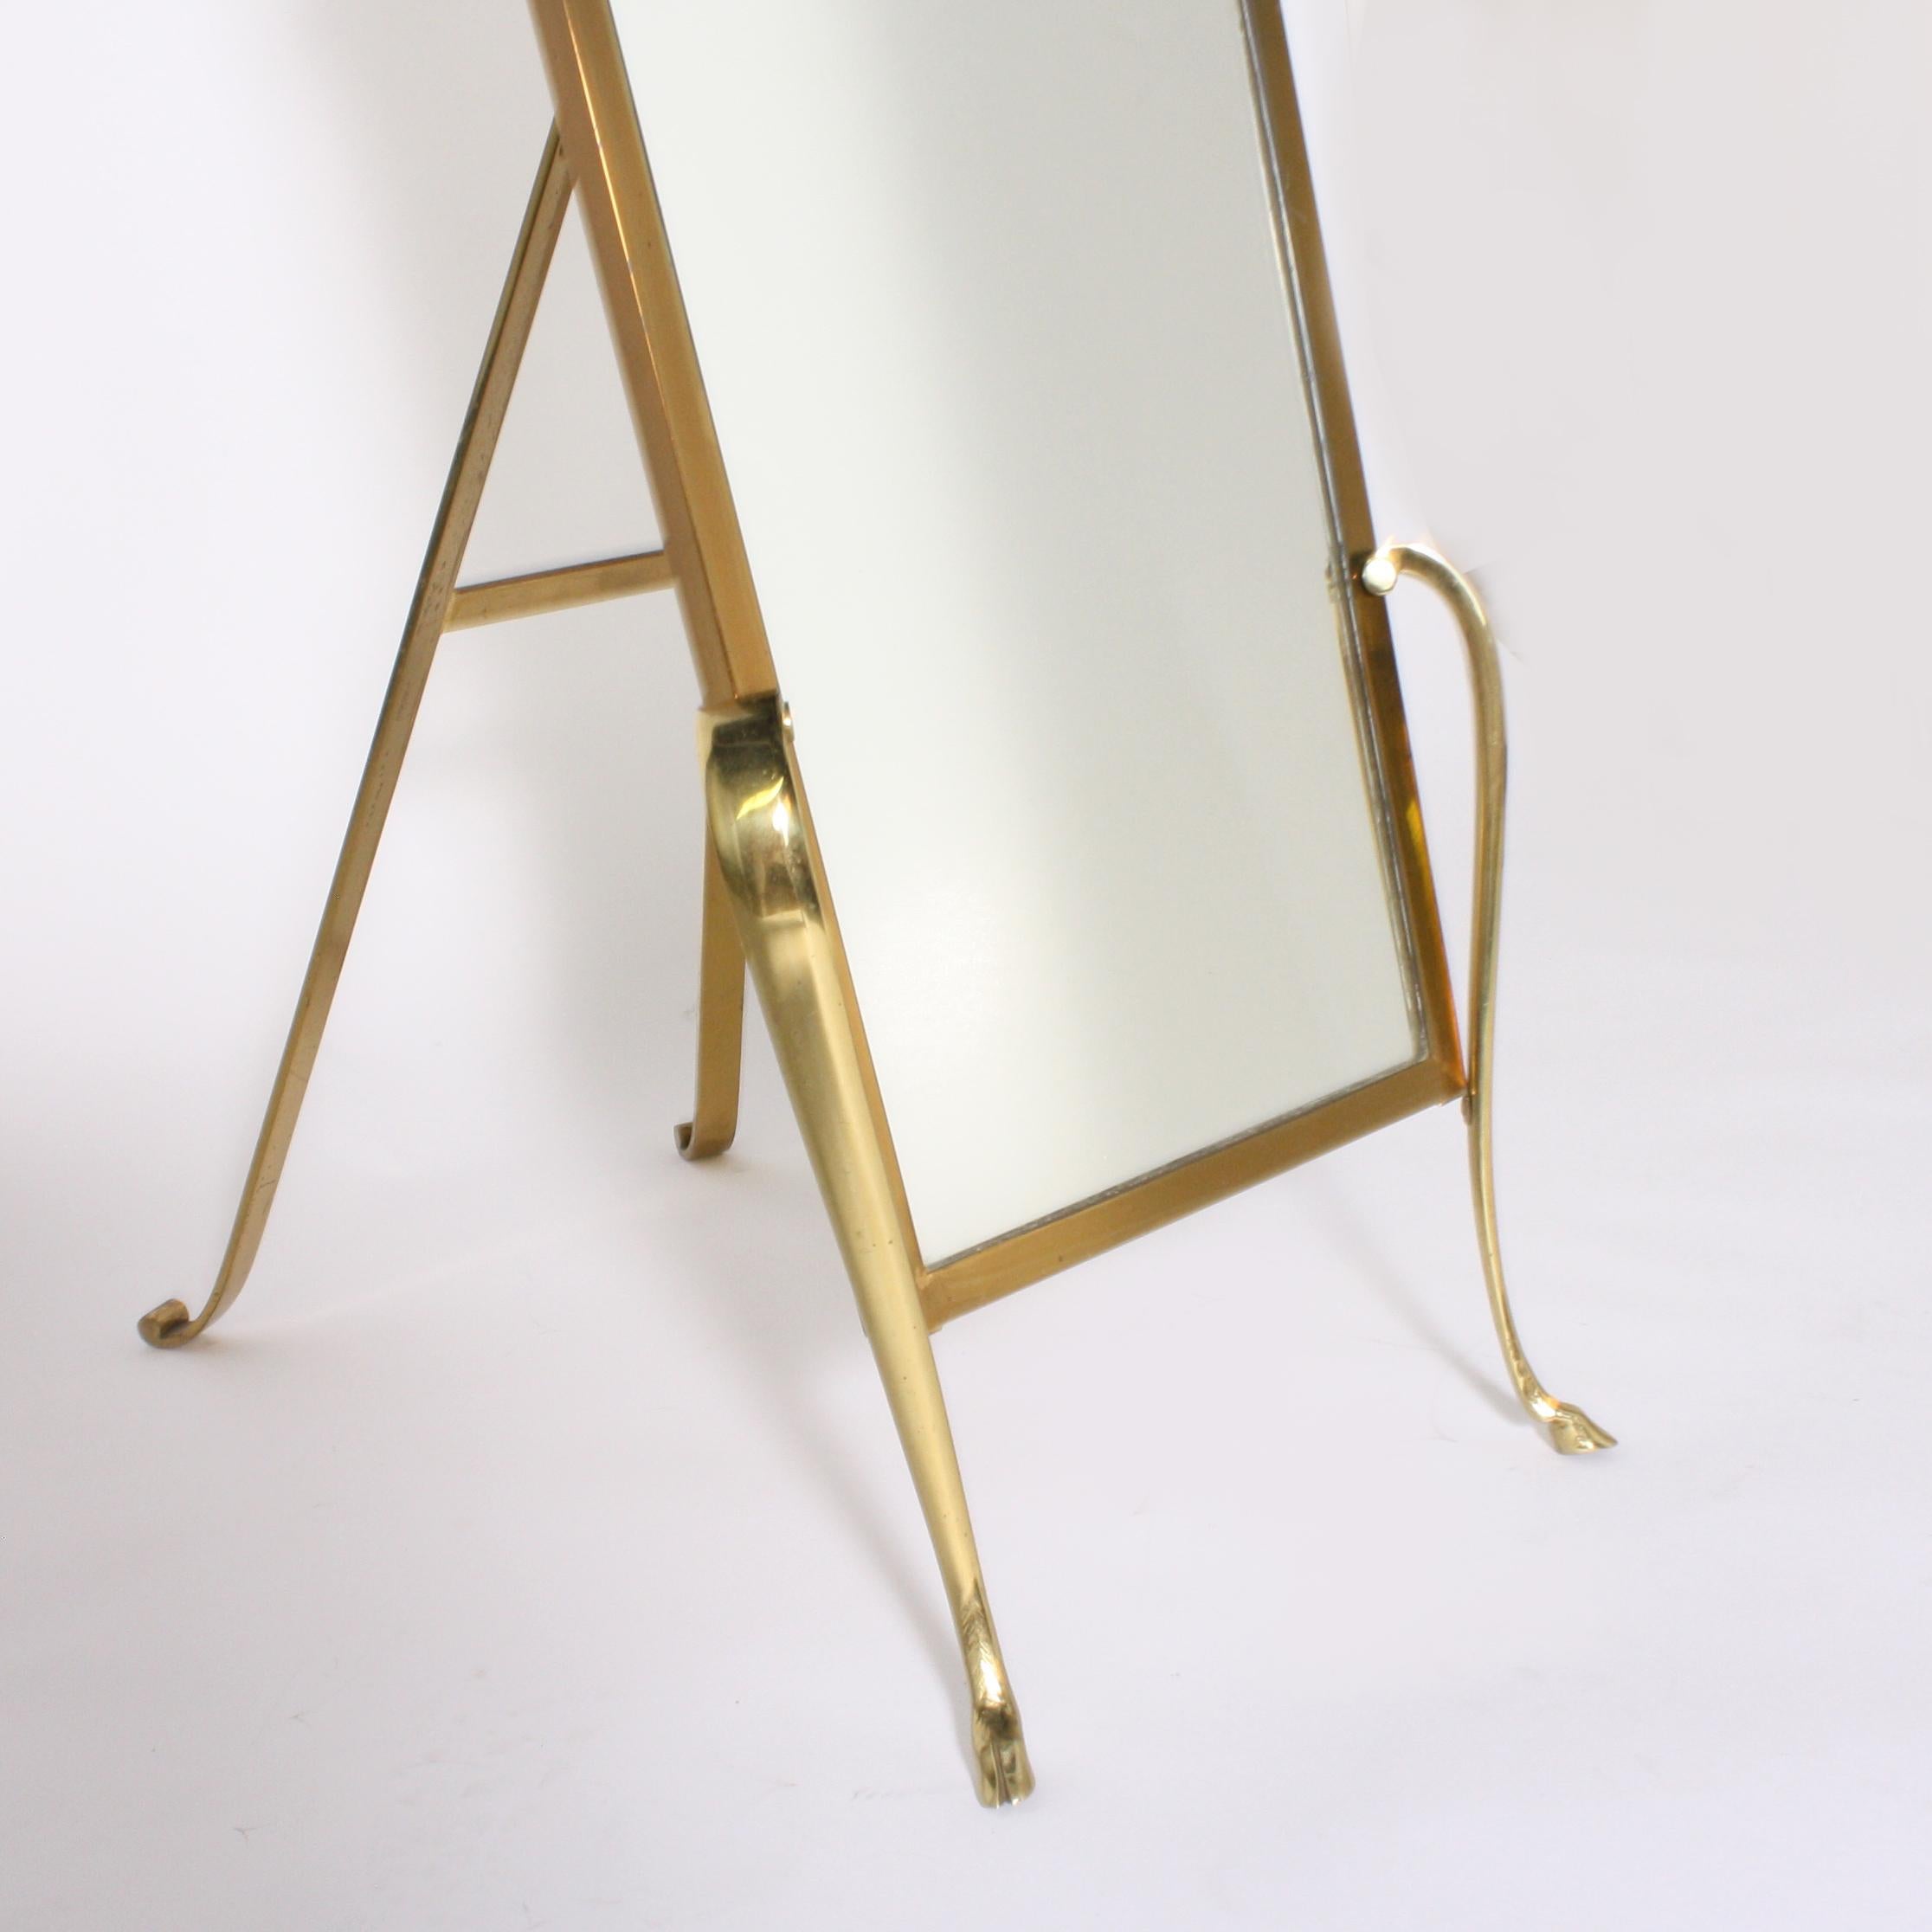 French standing vanity mirror with brass stand, circa 1950.